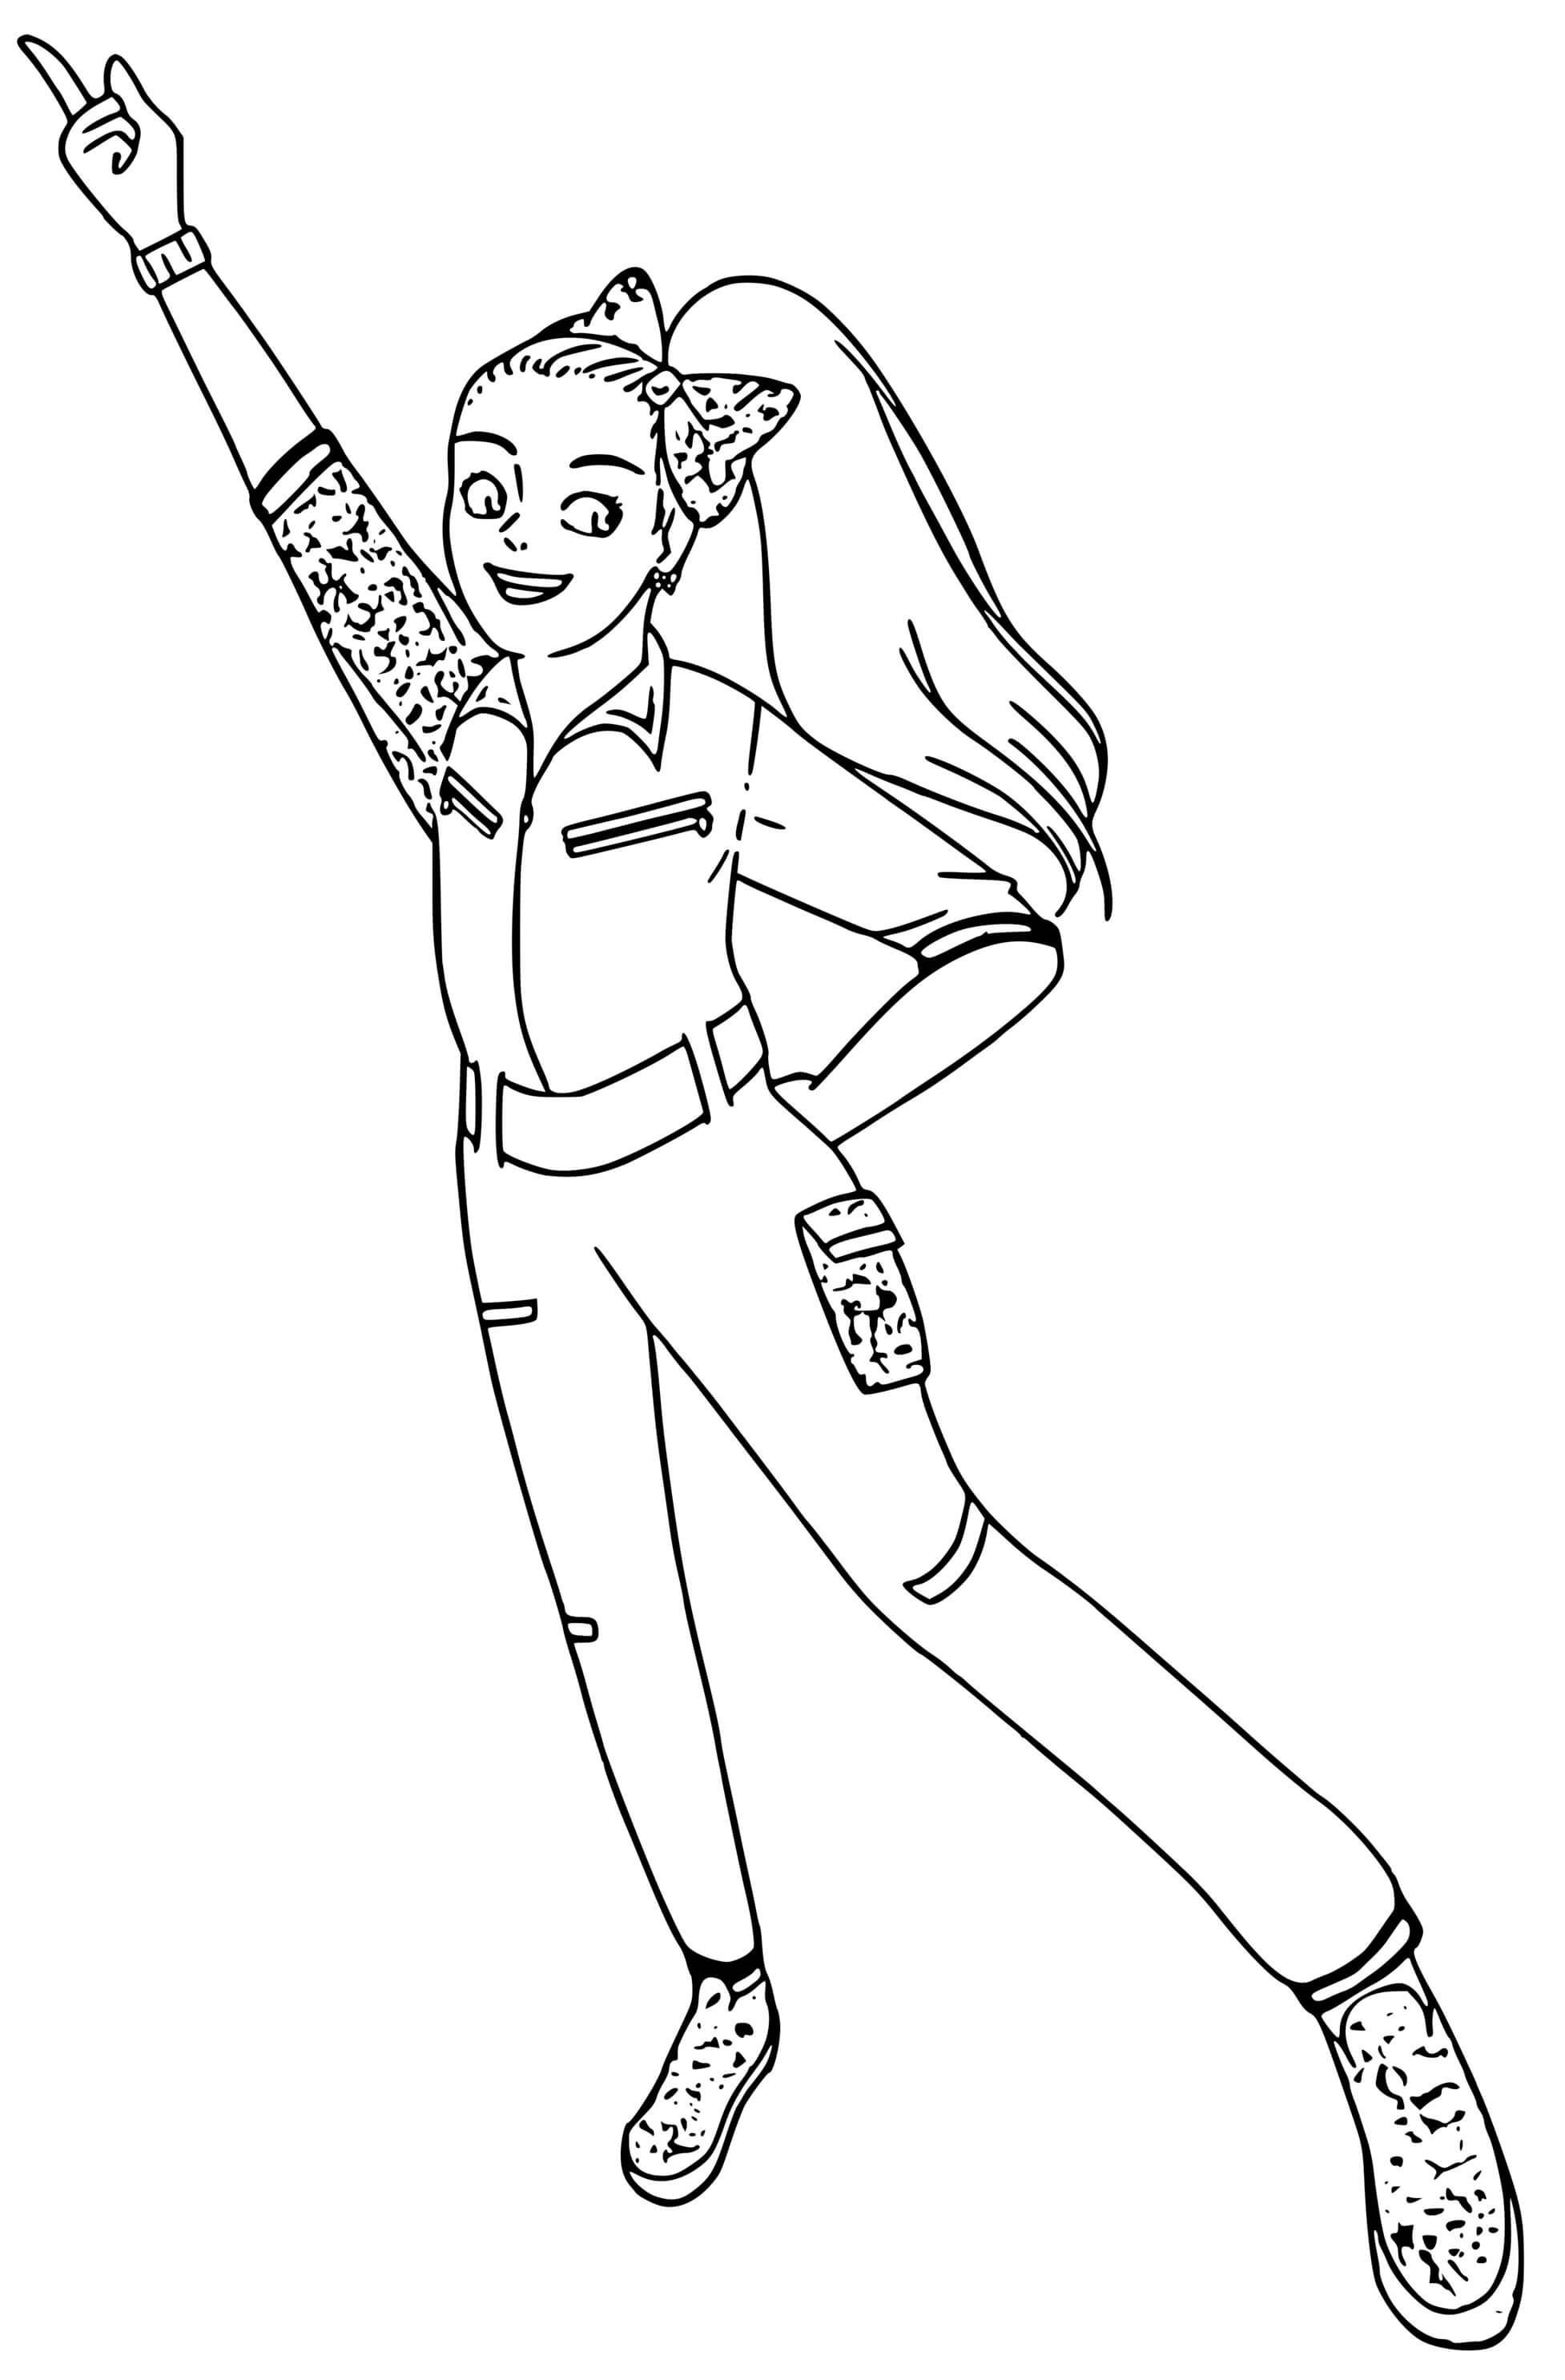 Jojo Siwa Dance Move Coloring Pages   Coloring Cool